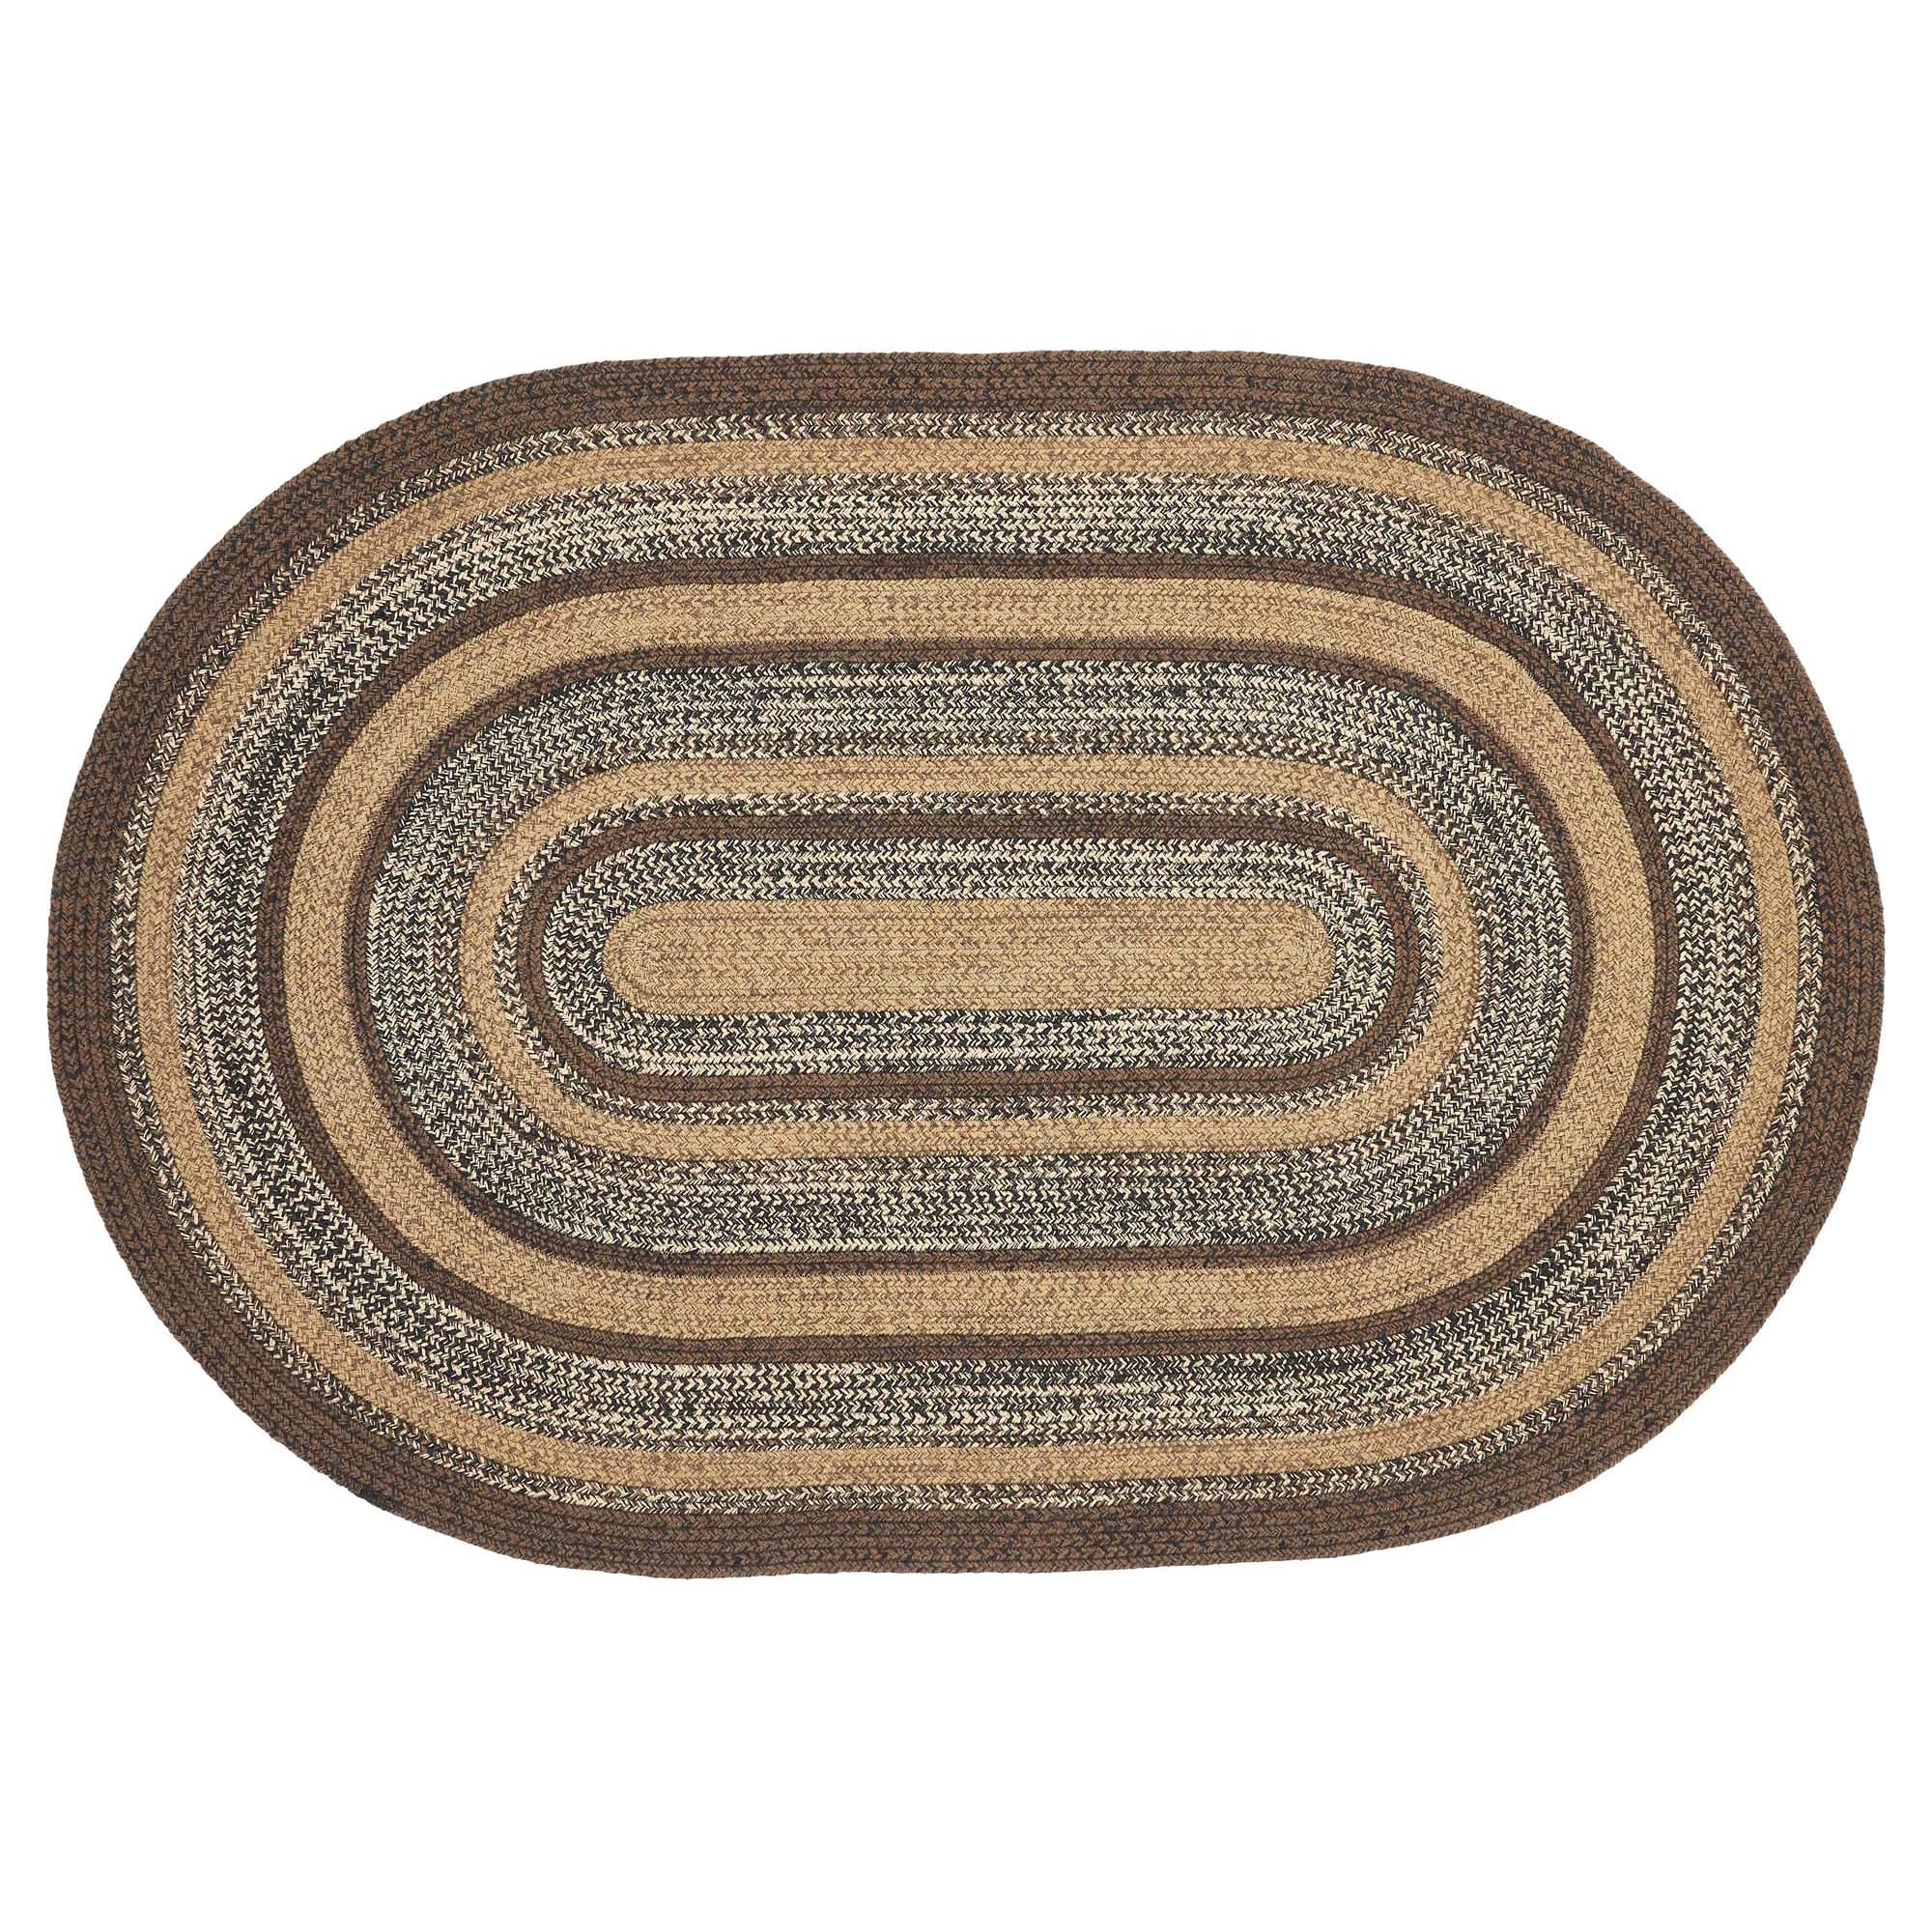 Espresso Jute Braided Rug Oval with Rug Pad 4'x6' VHC Brands